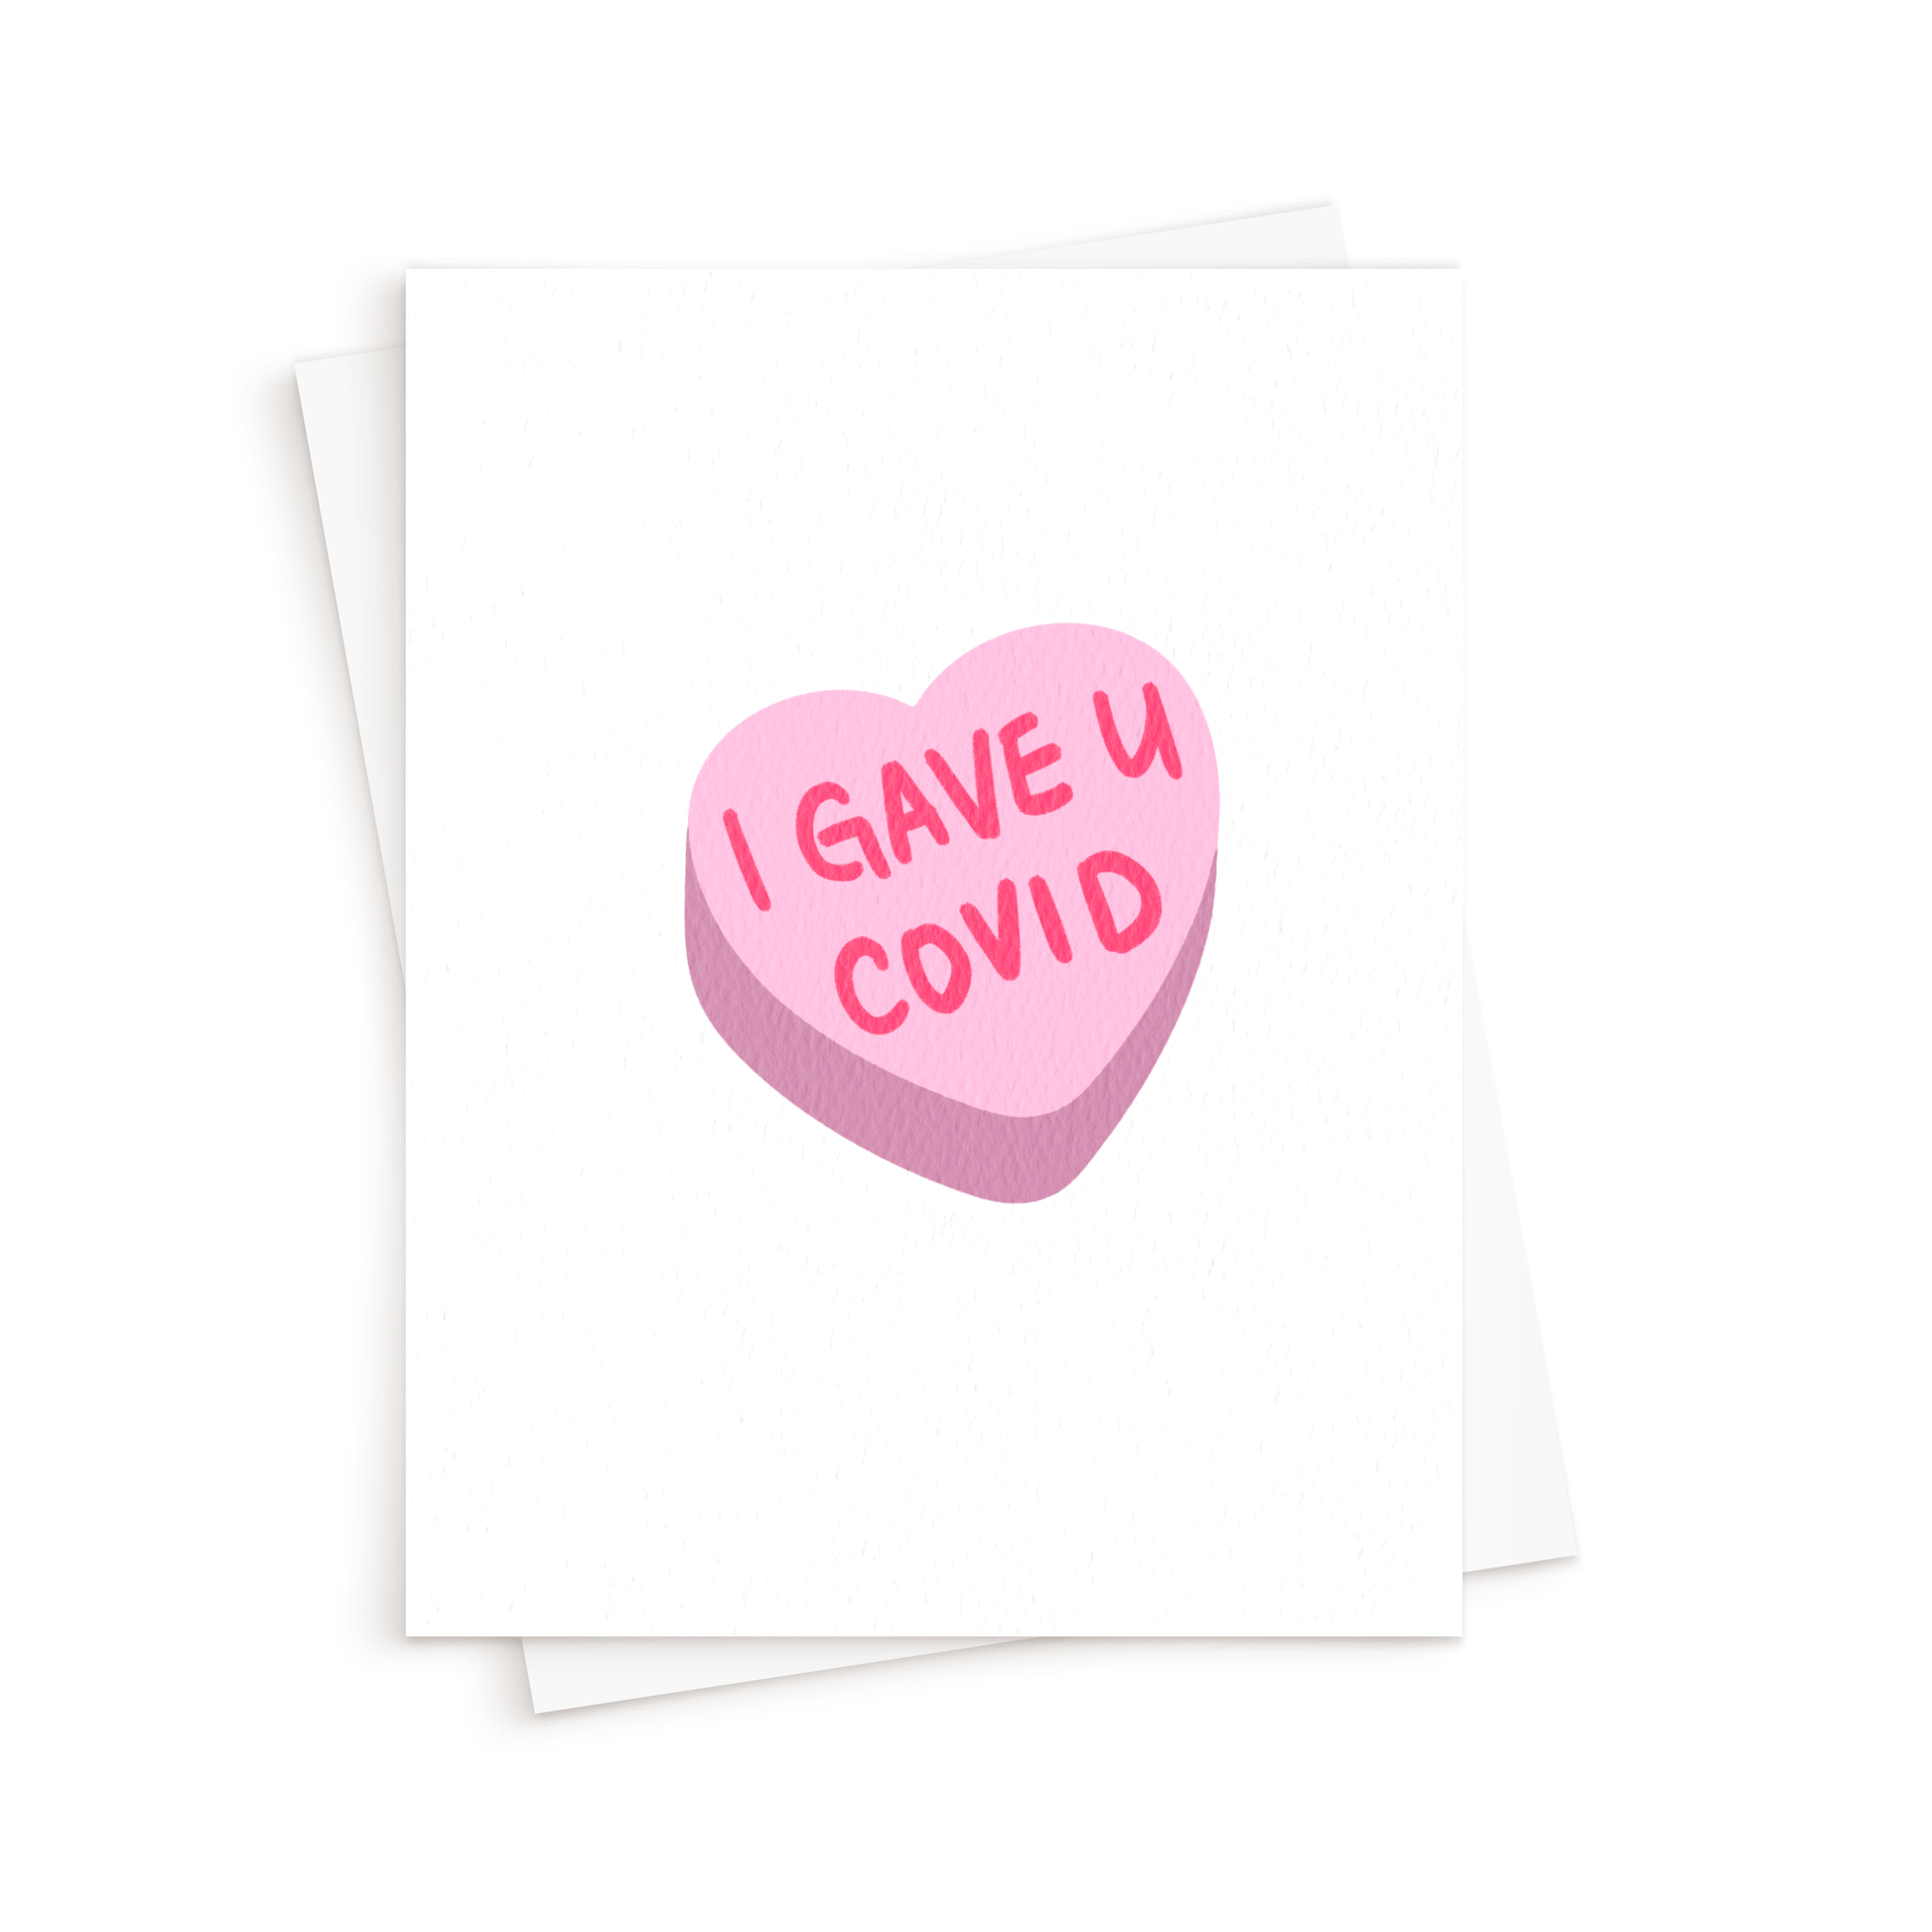 The COVID Candy Heart Card. I Gave You COVID Card.